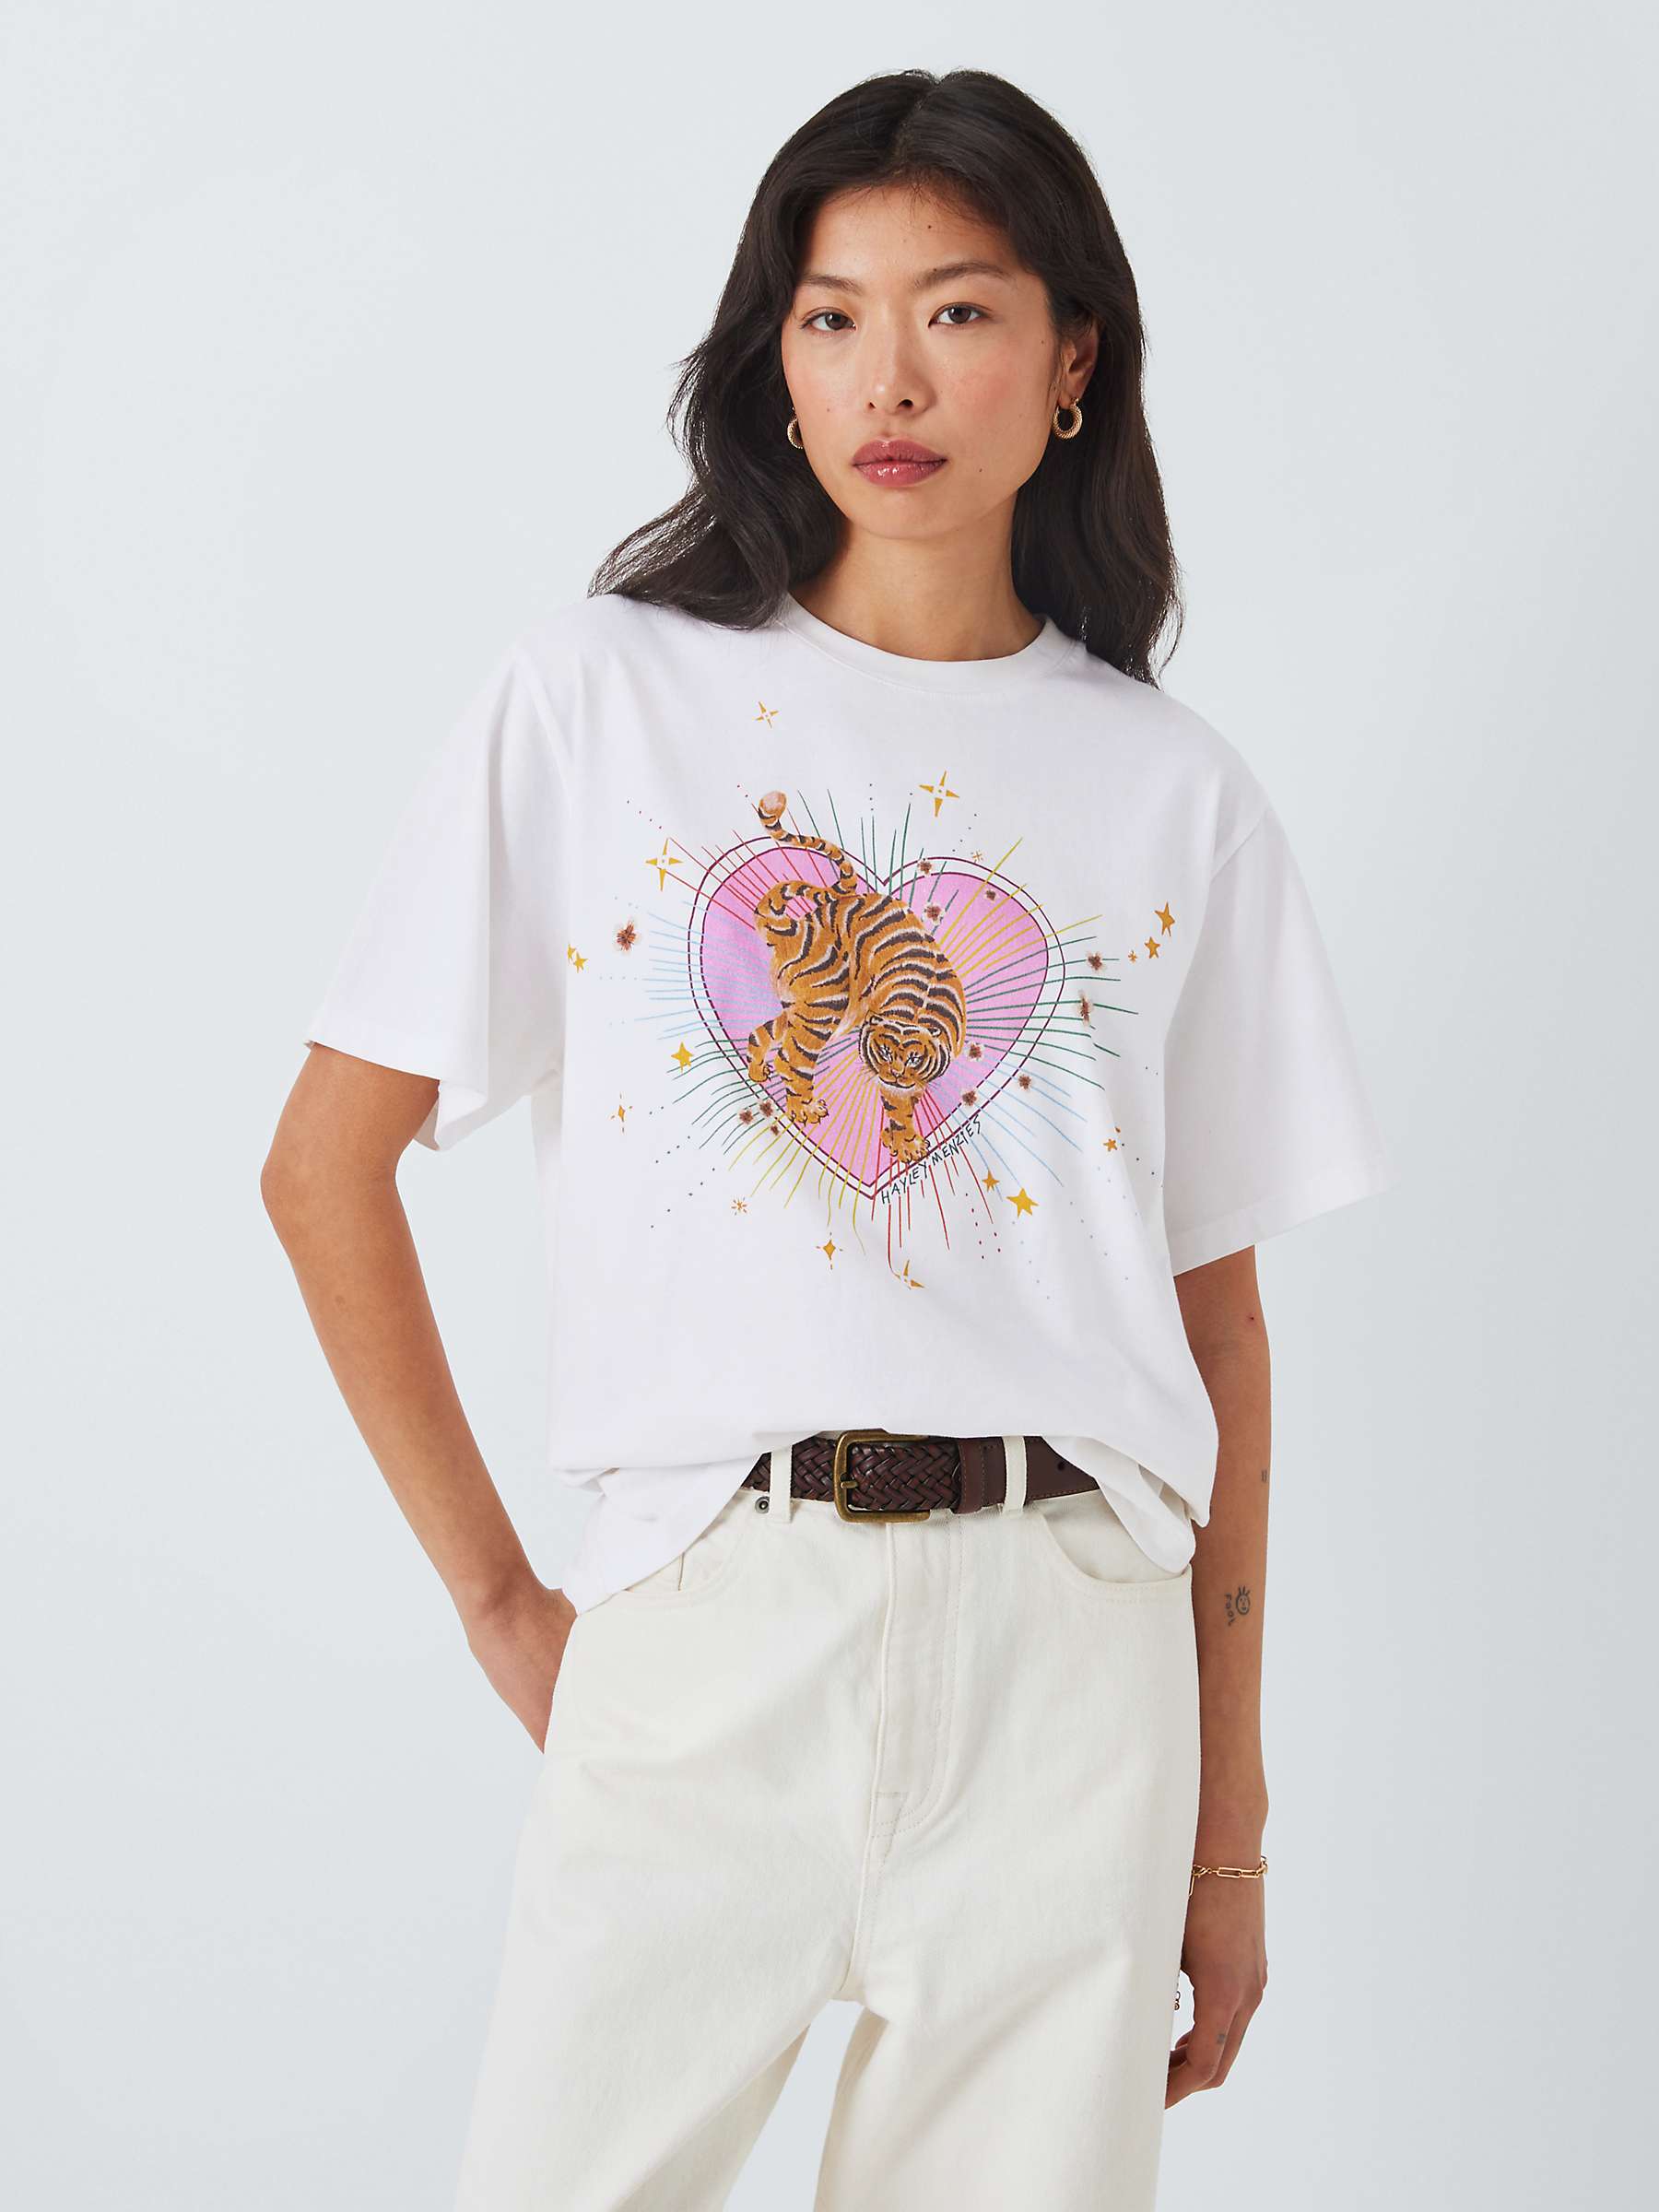 Buy Hayley Menzies Tiger Print T-Shirt, White Online at johnlewis.com